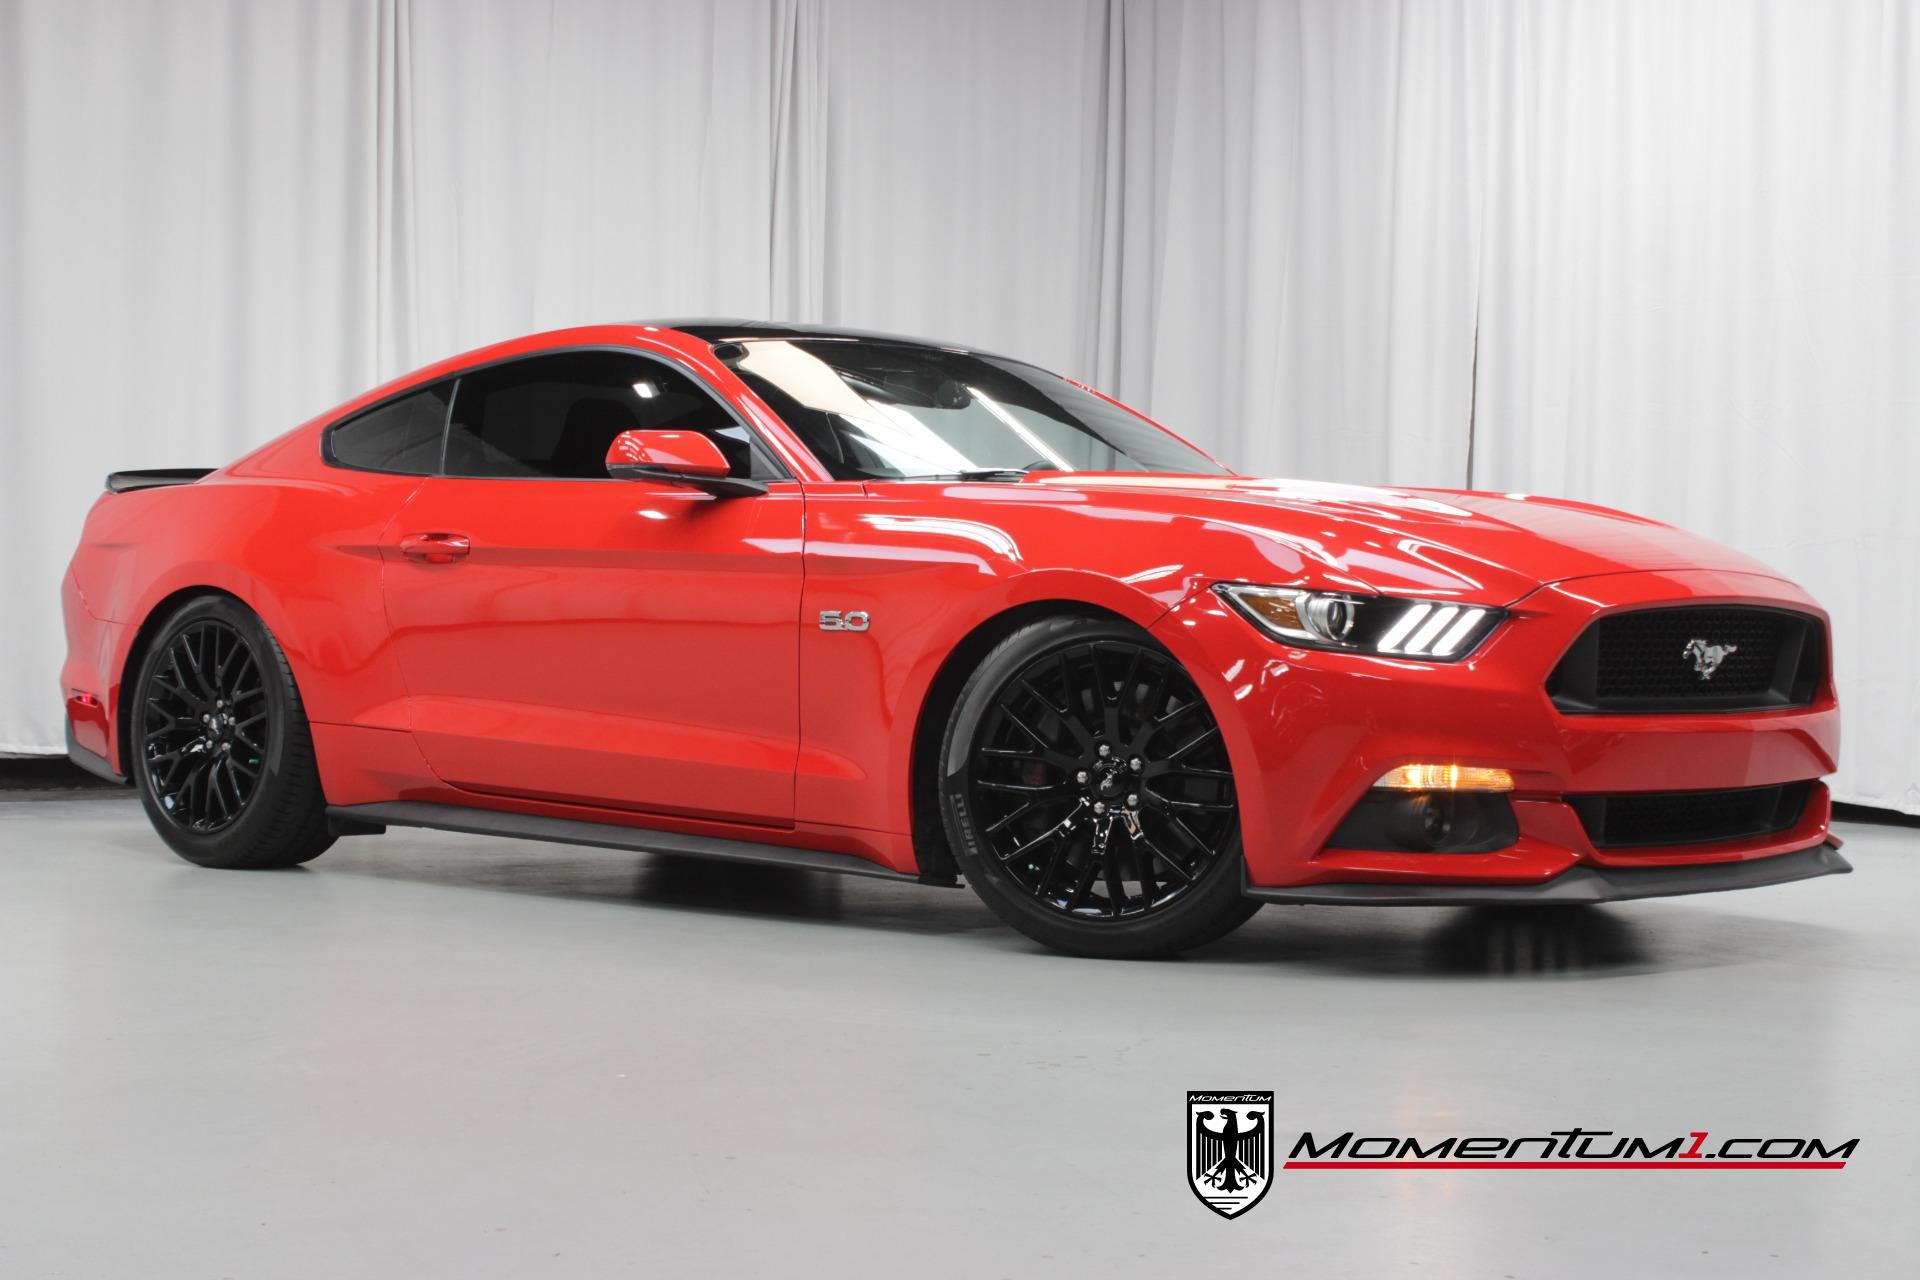 Used 2017 Ford Mustang Premium w/ Performance Package For Sale | Momentum Motorcars Inc Stock #309260